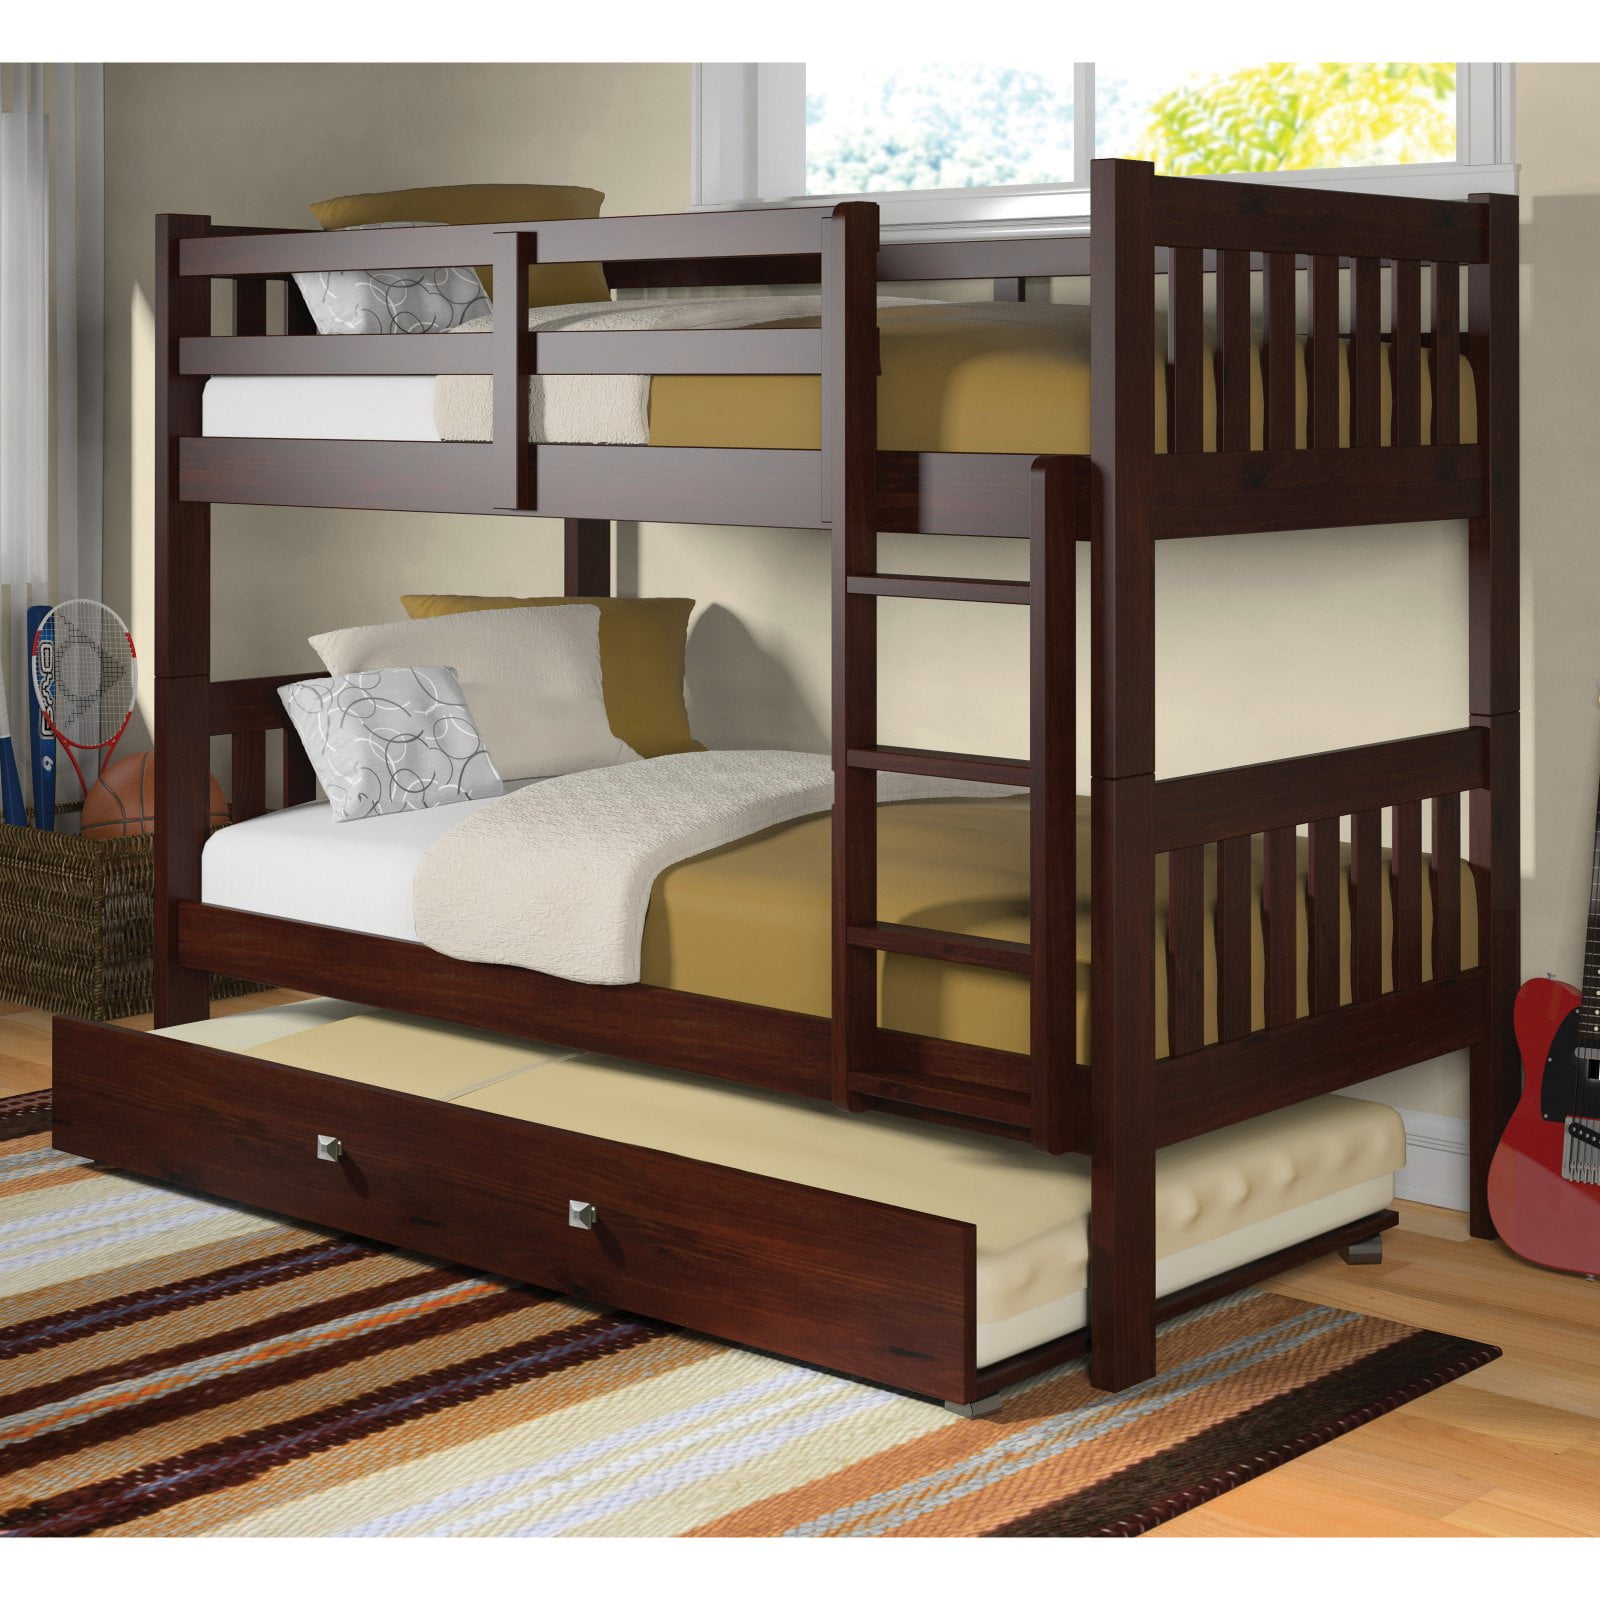 Acme Furniture Allentown Twin Over, Acme Furniture Allentown Bunk Bed